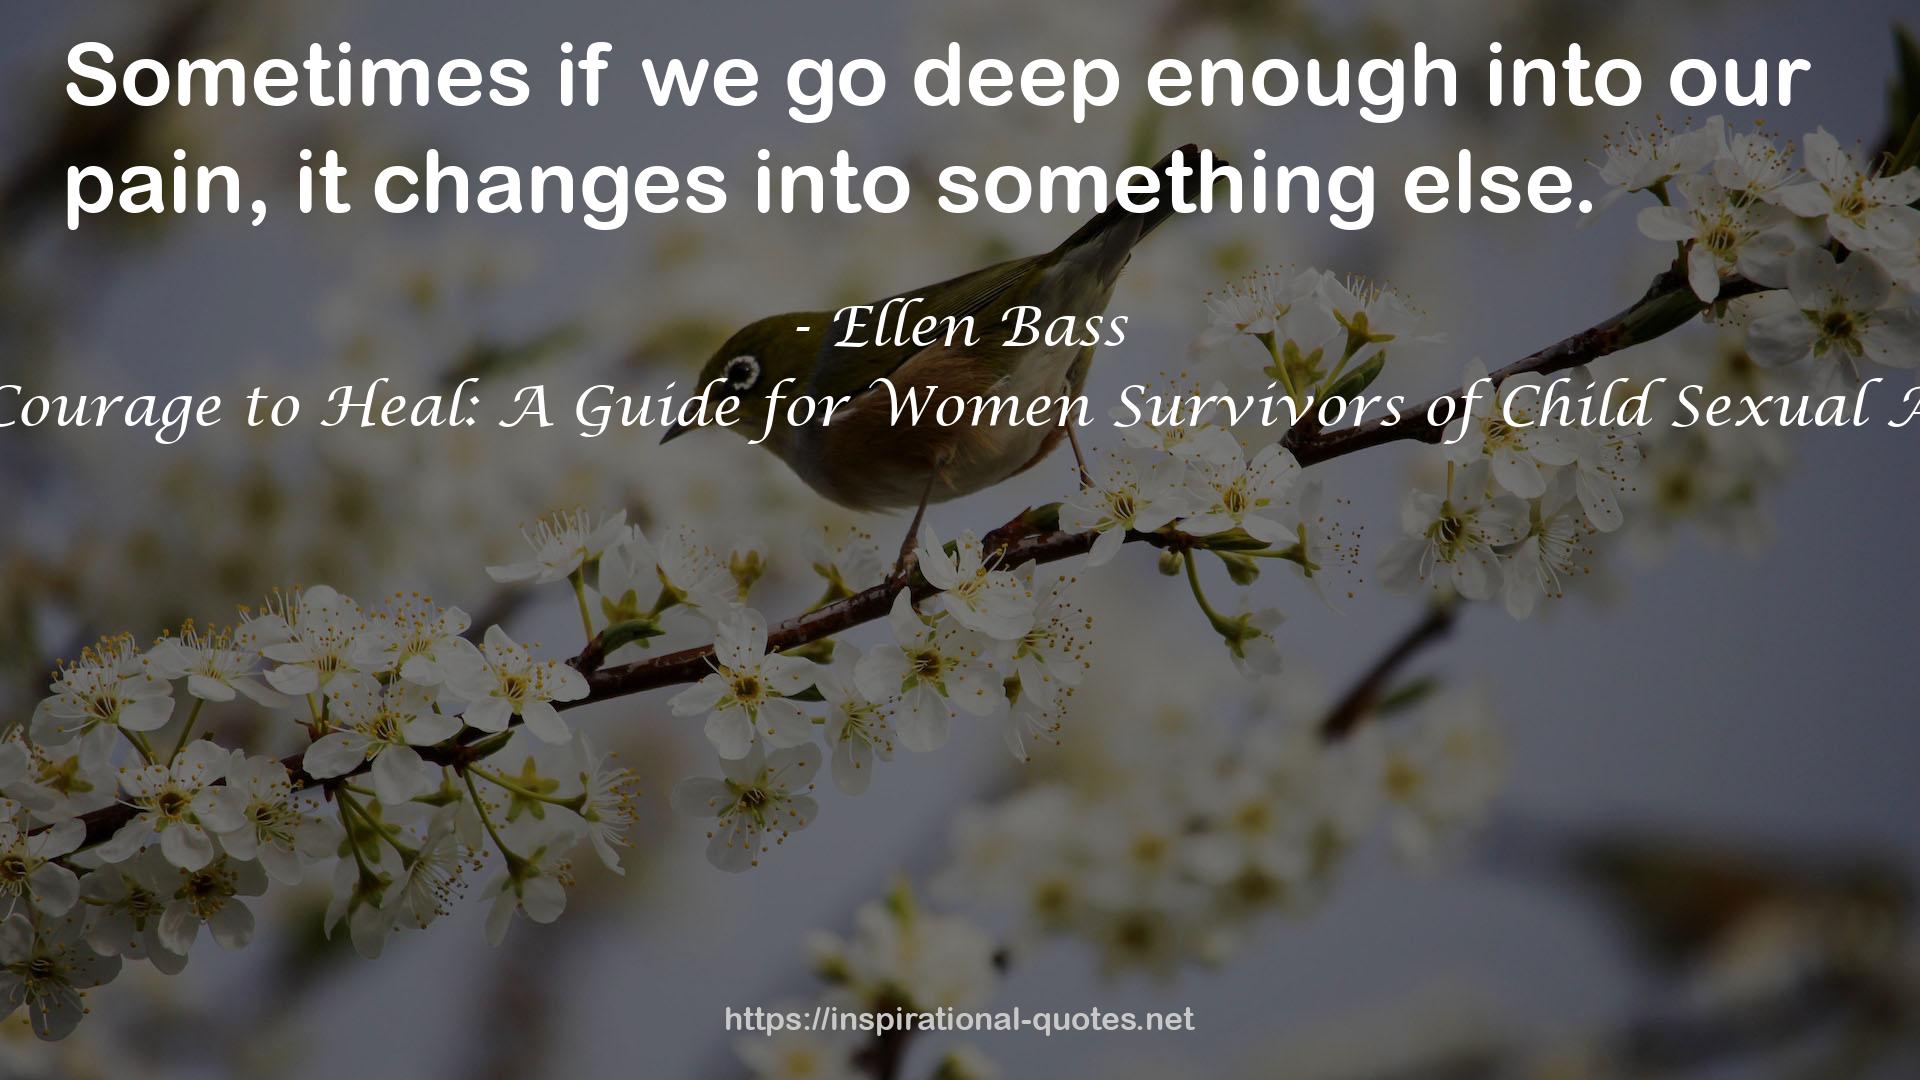 The Courage to Heal: A Guide for Women Survivors of Child Sexual Abuse QUOTES